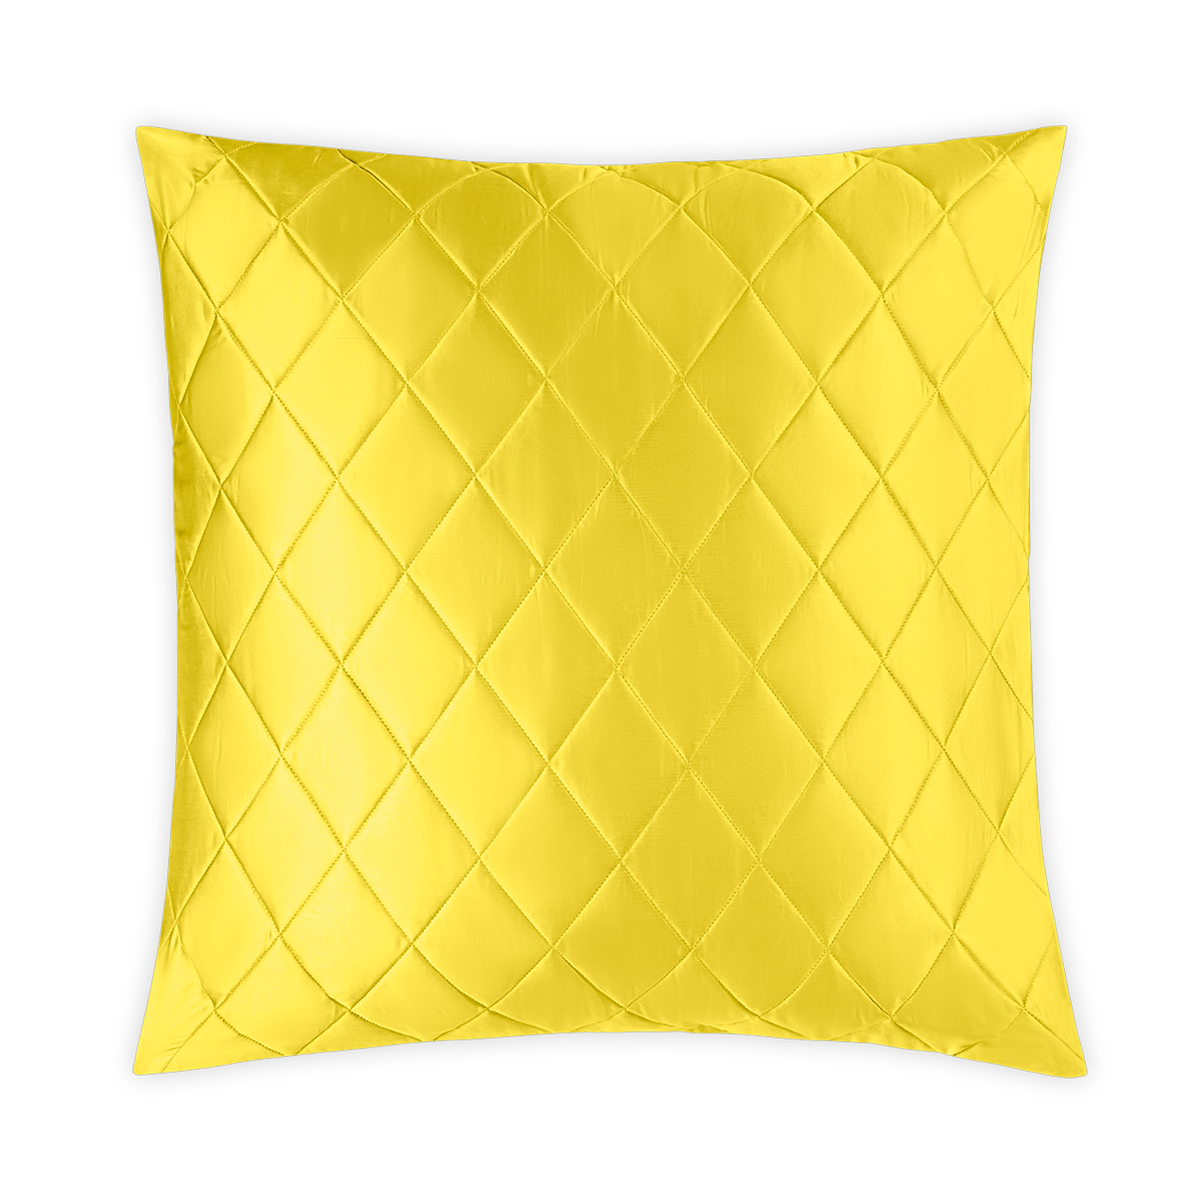 Silo Image of Matouk Nocturne Quilted Bedding Euro Sham in Lemon